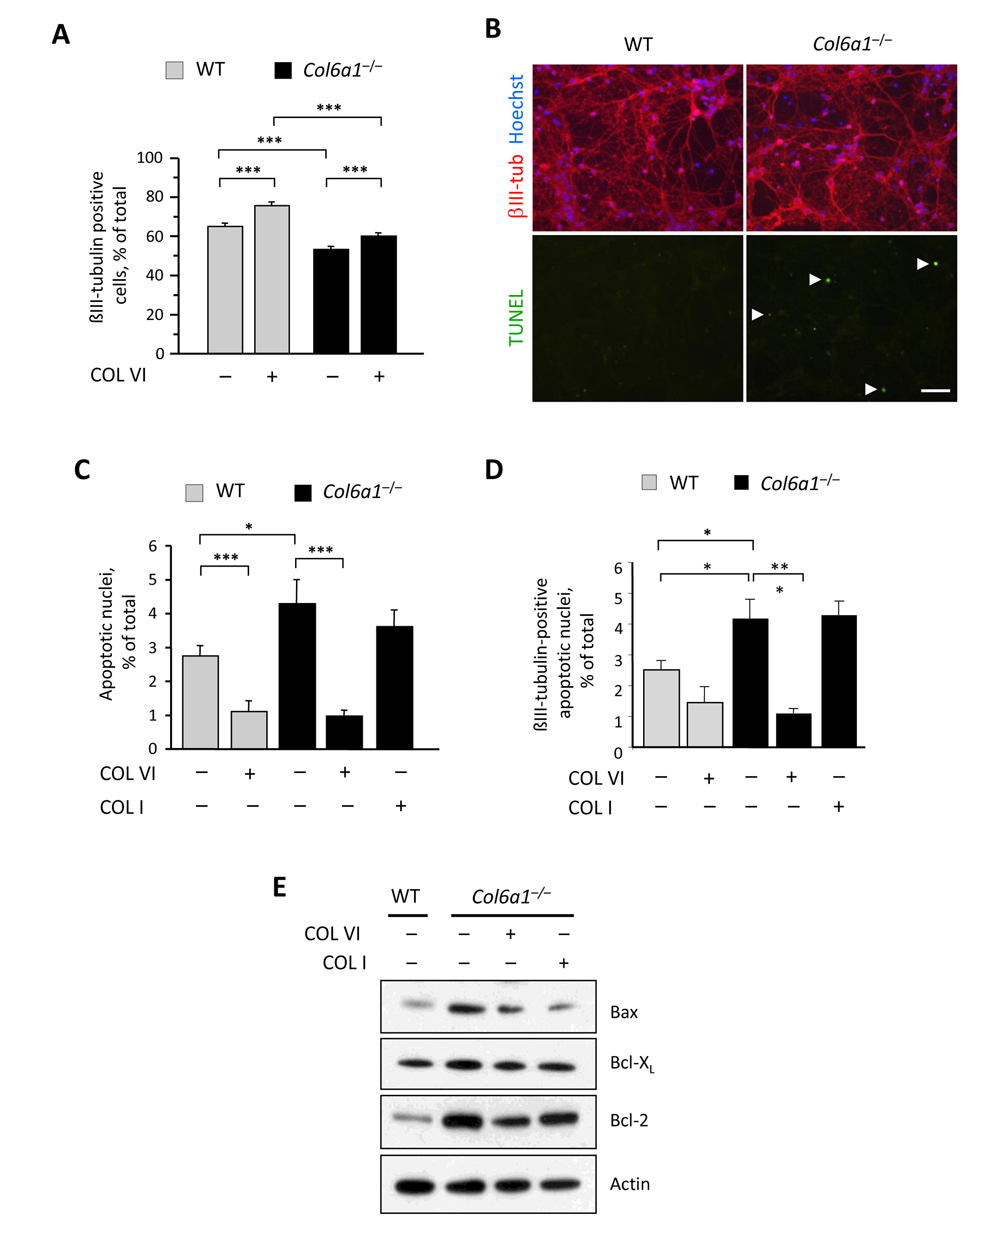 Lack of collagen VI affects the neuronal population and induces increased apoptosis in neural cell cultures